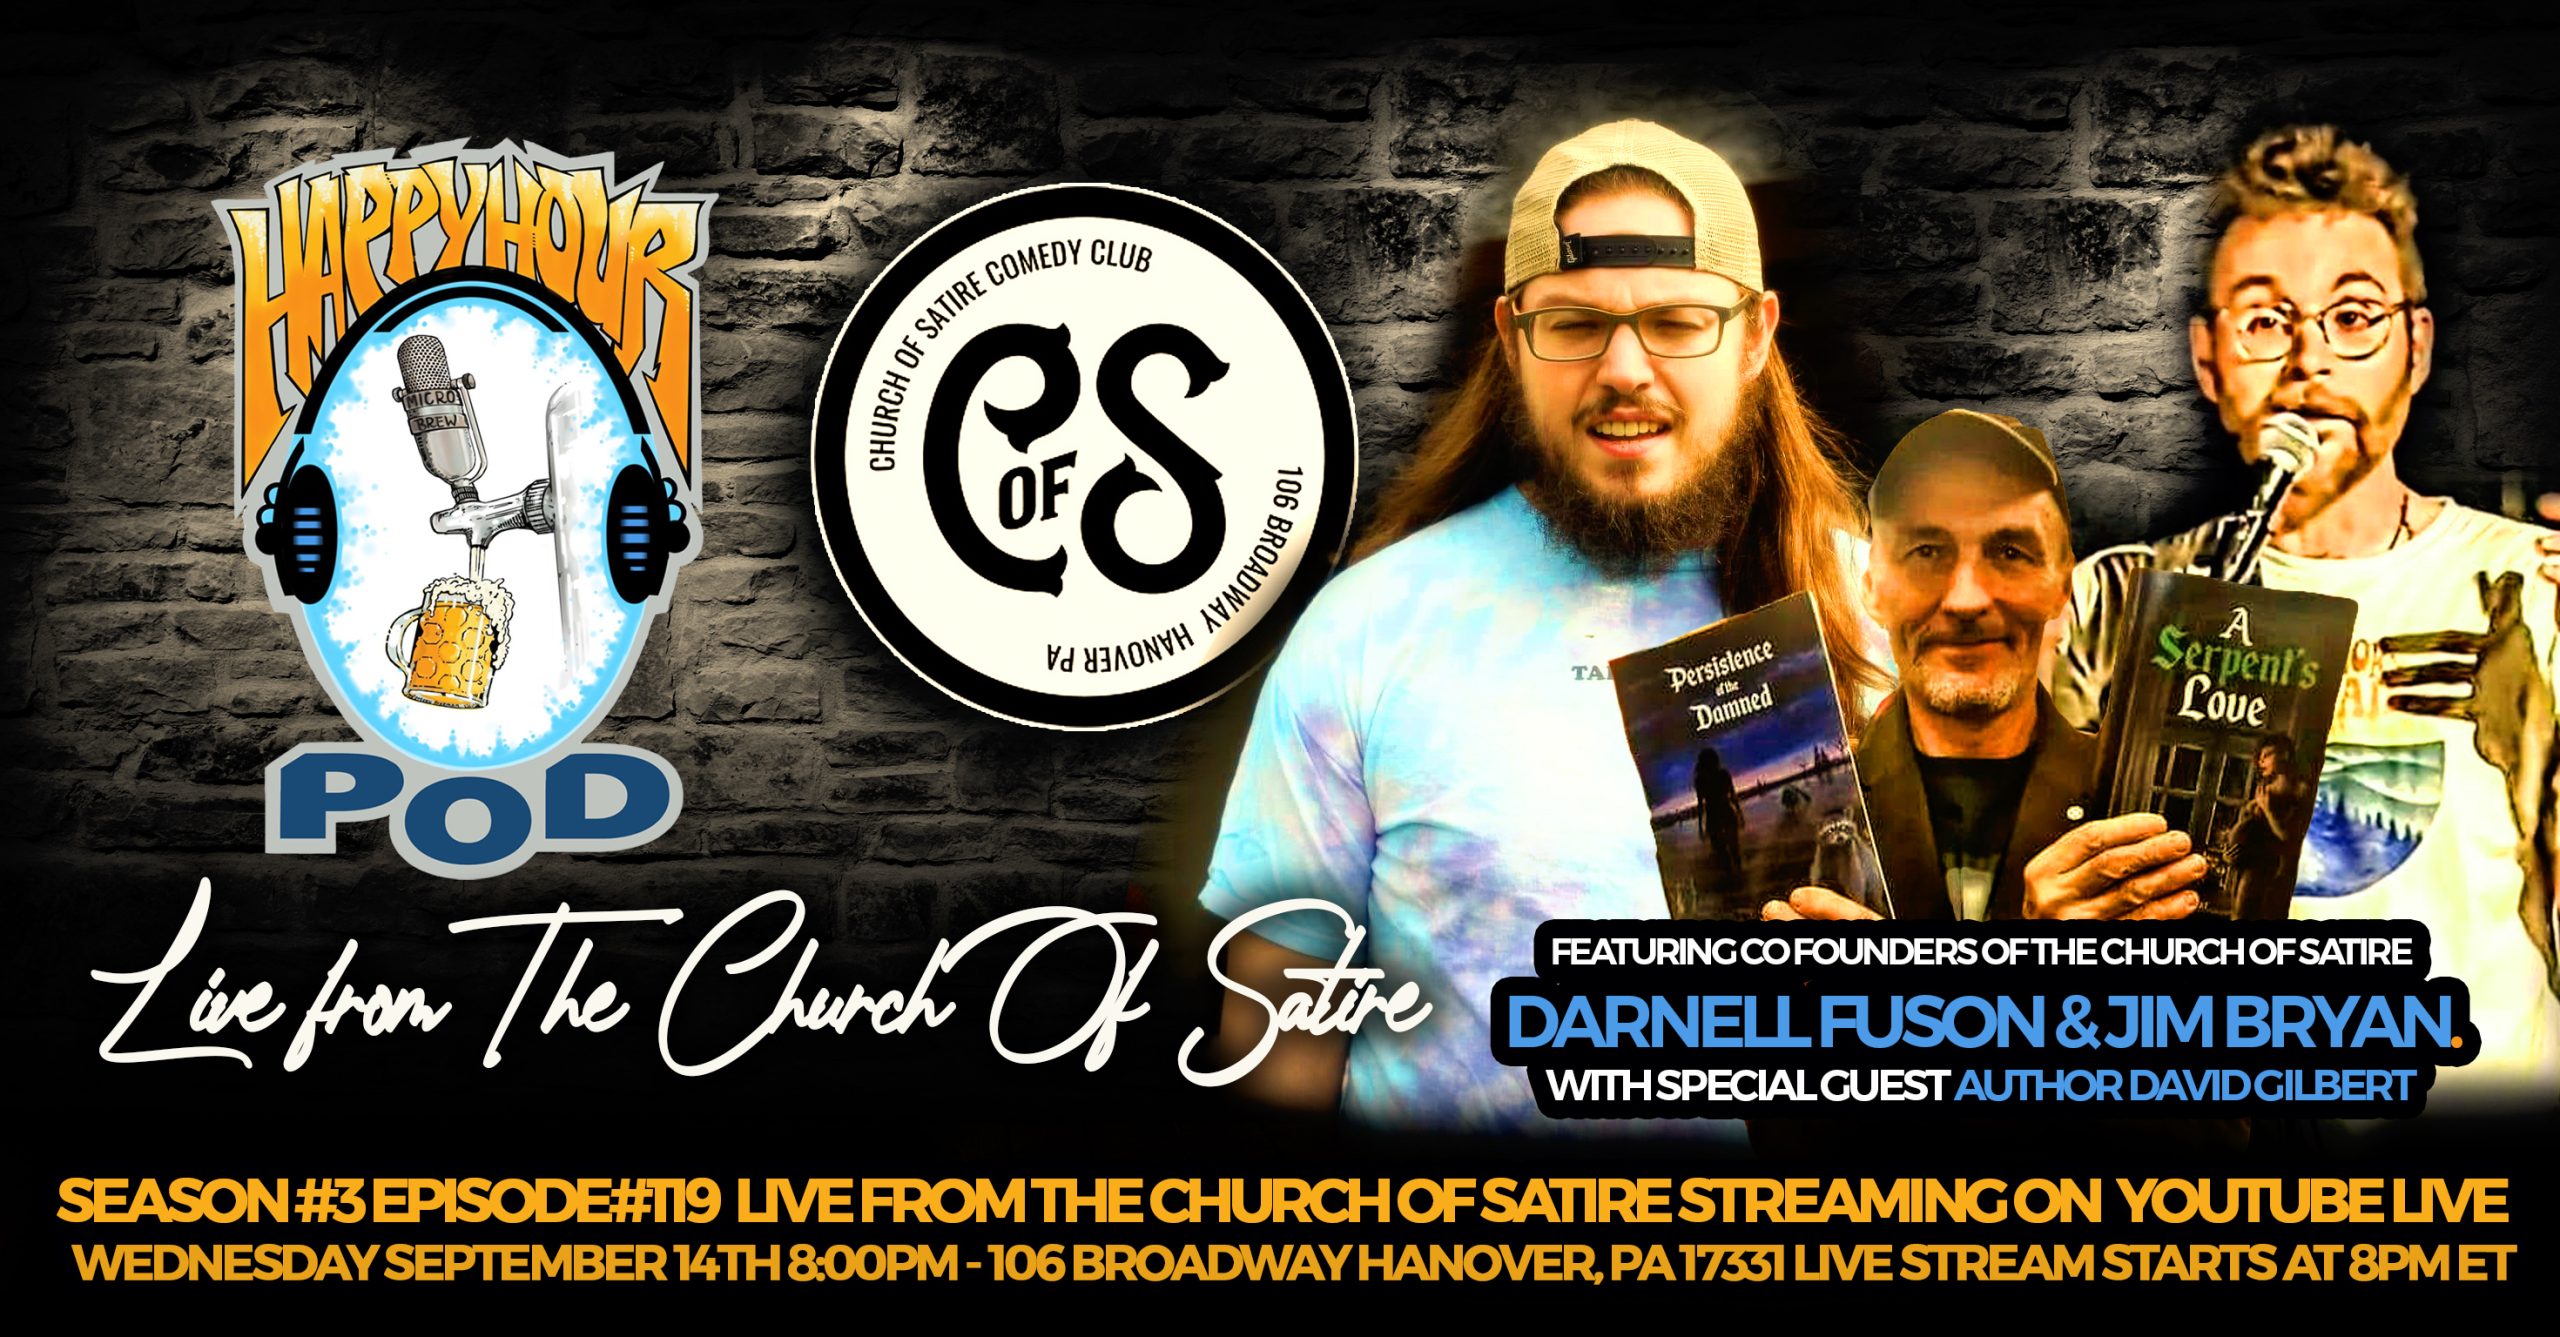 Featuring Jim Bryan, Darnell Fusion, David Gilbert

Recorded Live at the church of satire